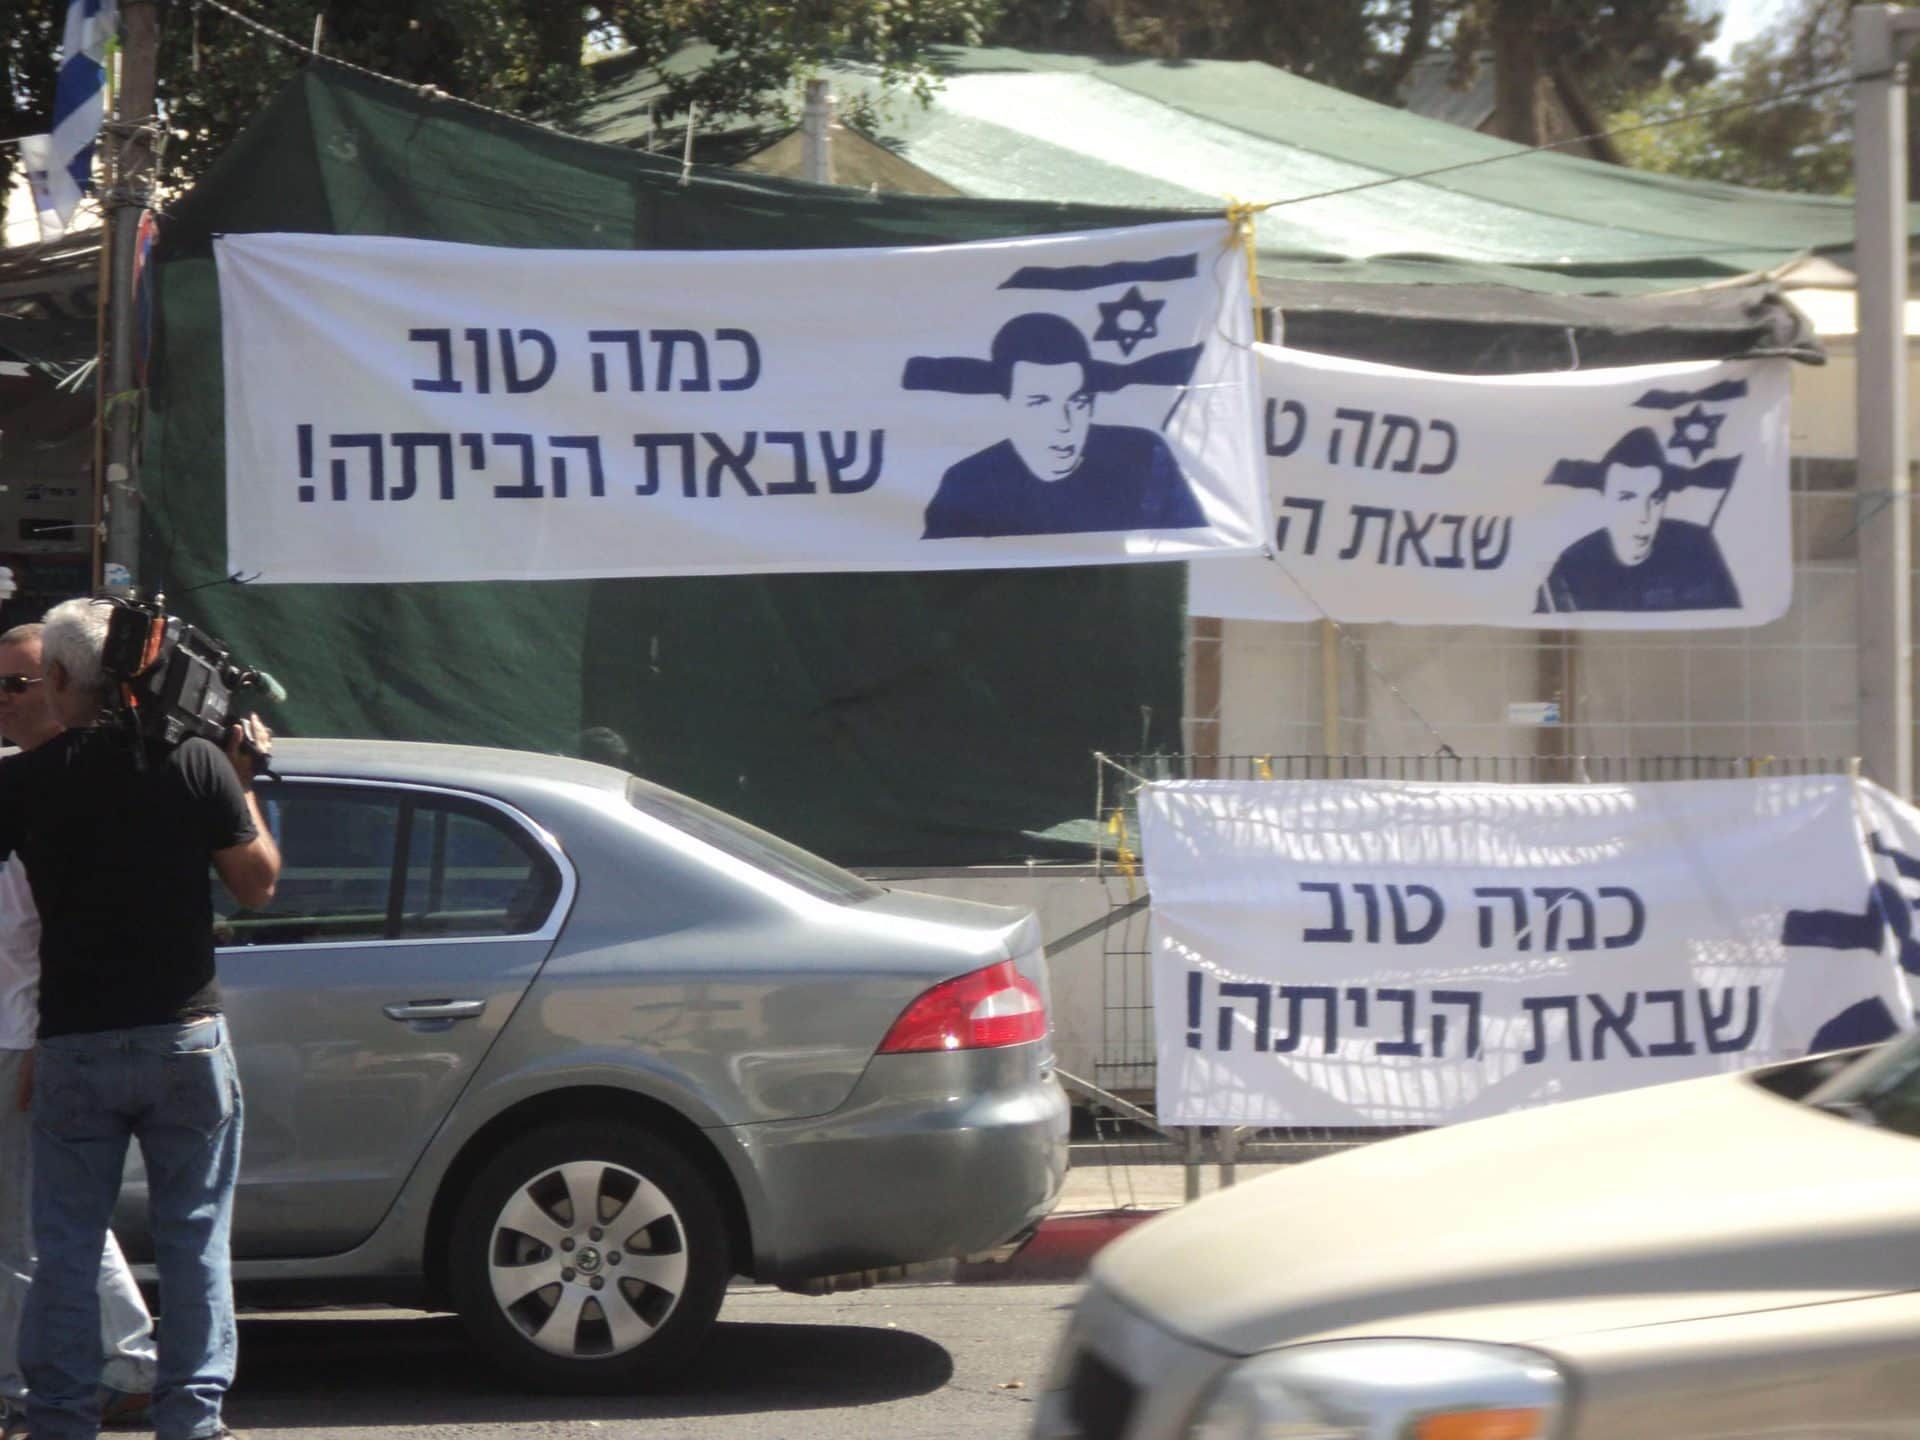 Outside the Gilad Shalit Protest Tent